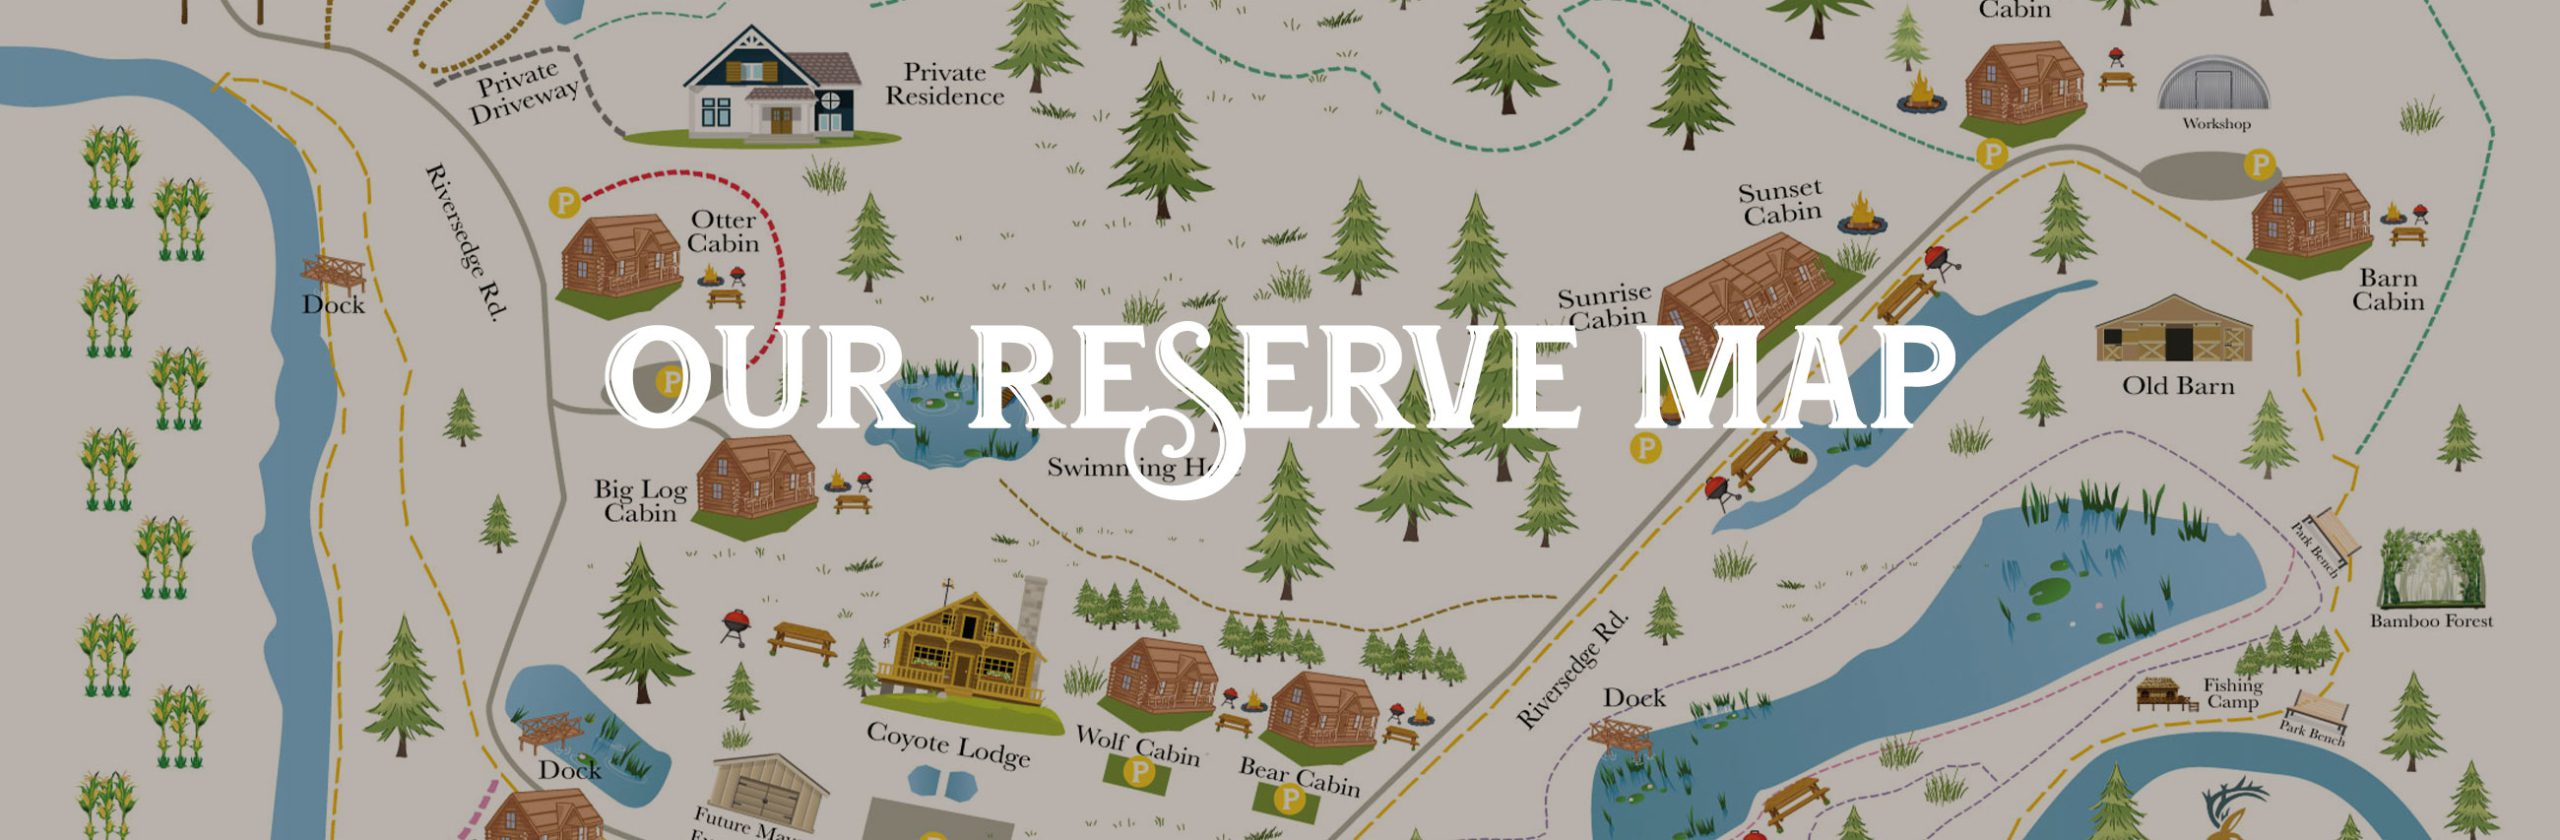 Deerwoode Reserve | Our reserve map.